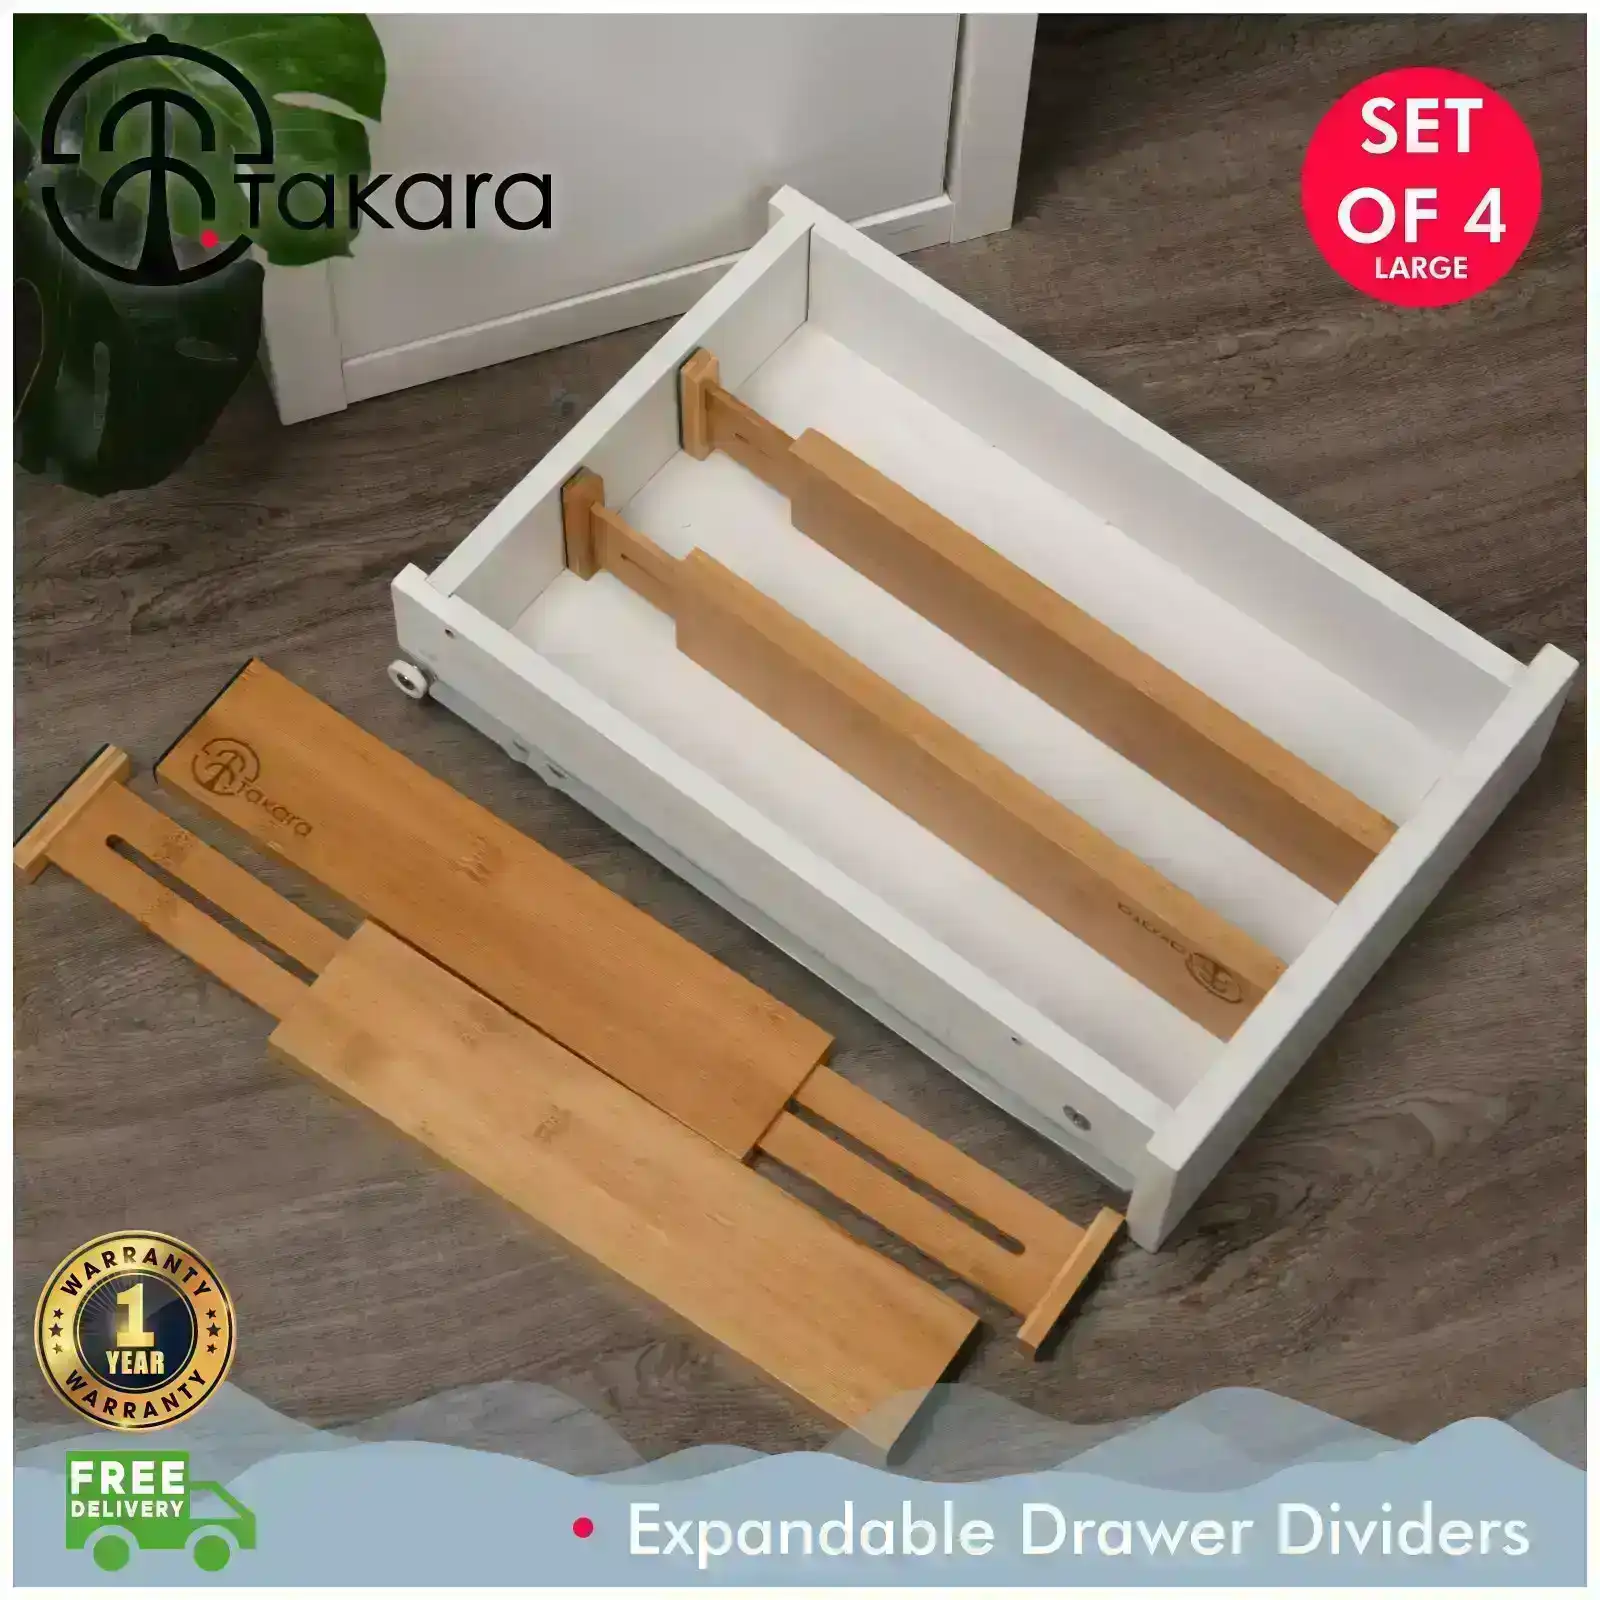 Takara Expandable Drawer Dividers Set-of-4 Large 44.5-55.9x6.5x1.6cm